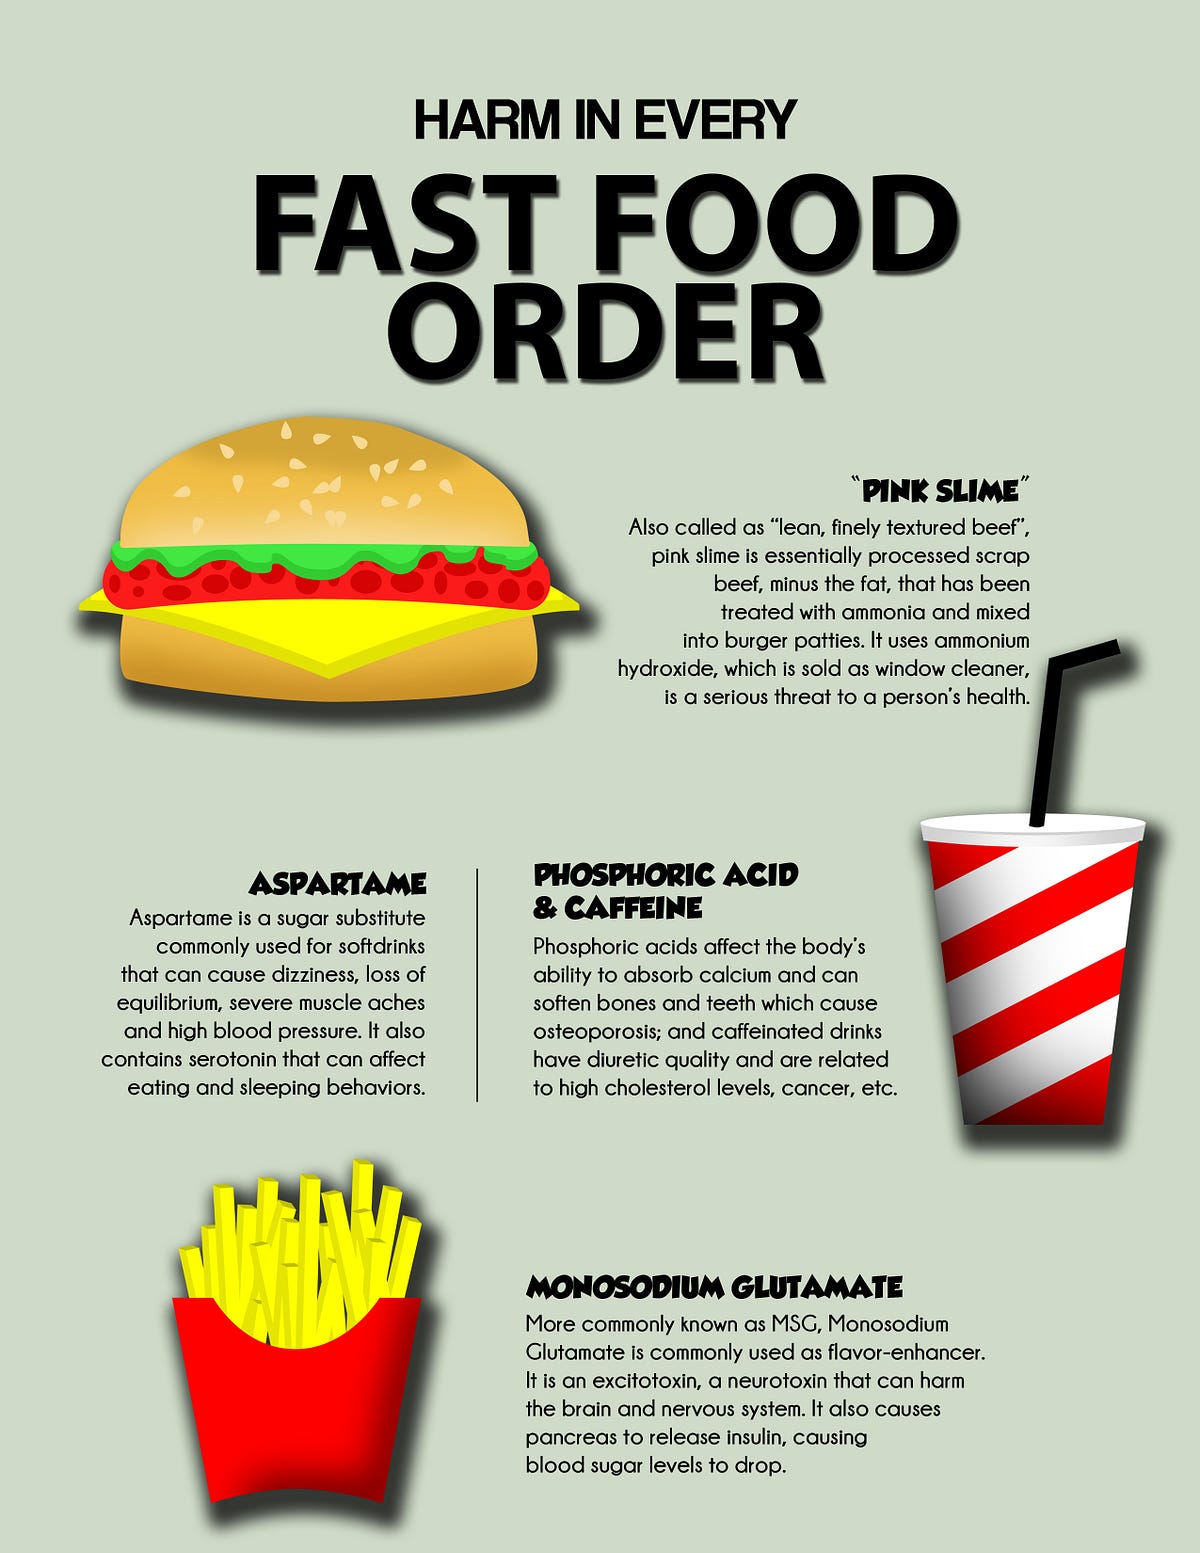 fast food topic for speech